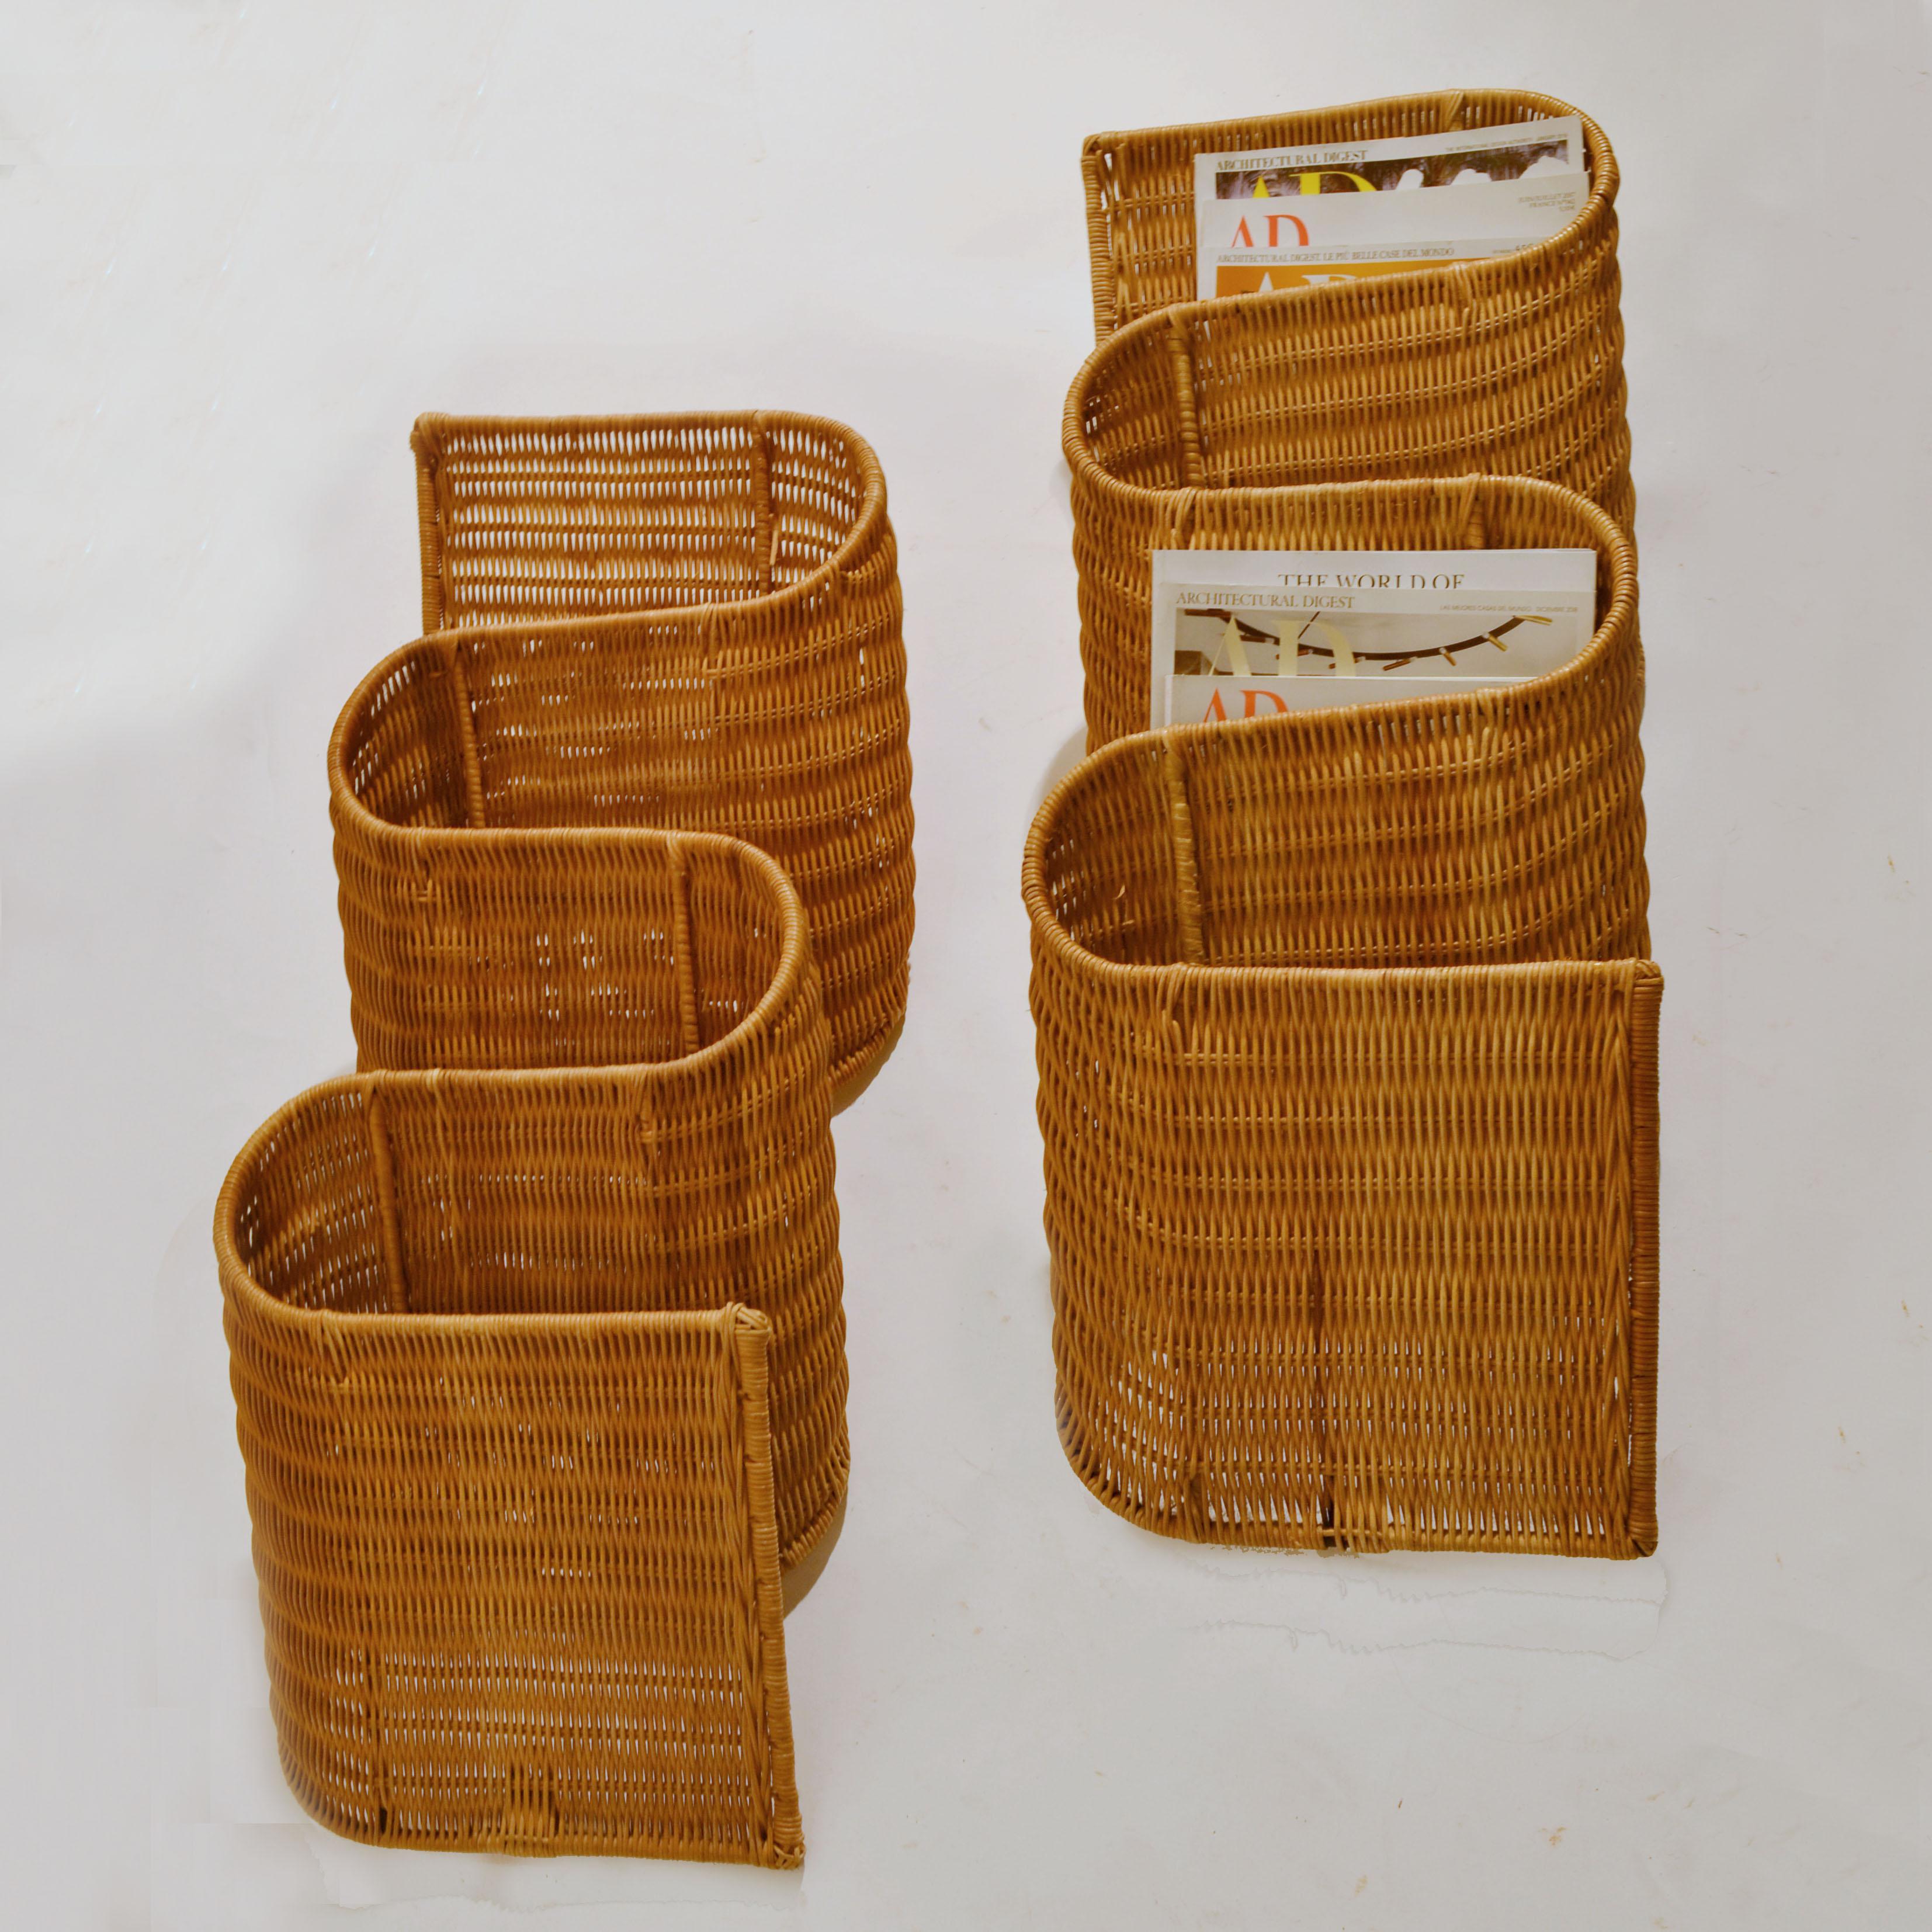 Wall mounted rattan magazine holders are very efficient and decorative, the way they snake along the wall. They each have 4 sections for magazines when hung vertically. The cane work is woven around a metal structure. They are made in Italy,